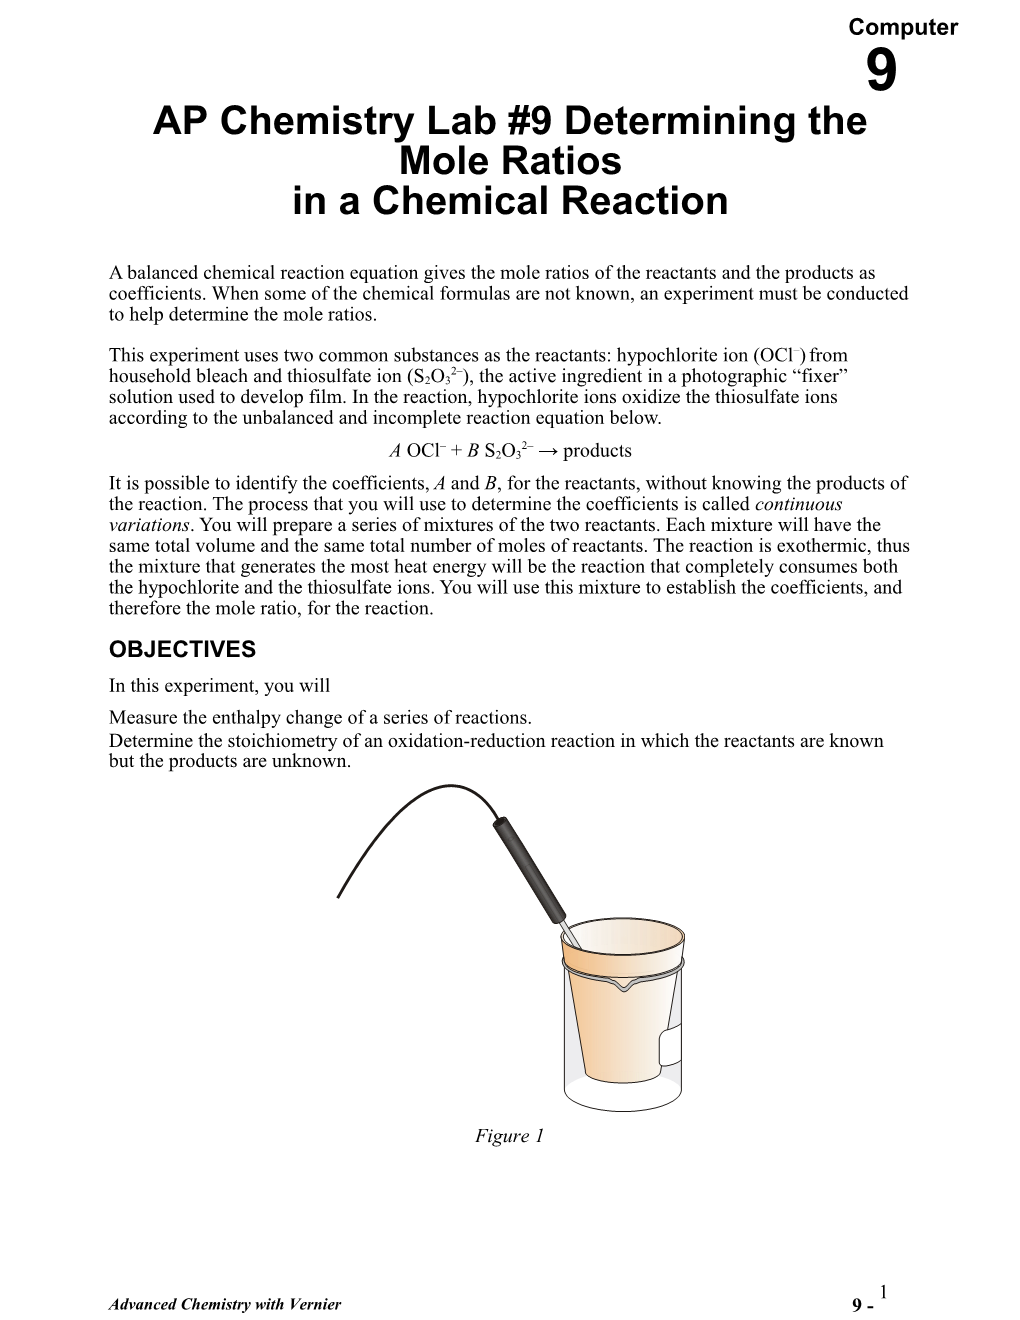 Determining the Mole Ratios in a Chemical Reaction